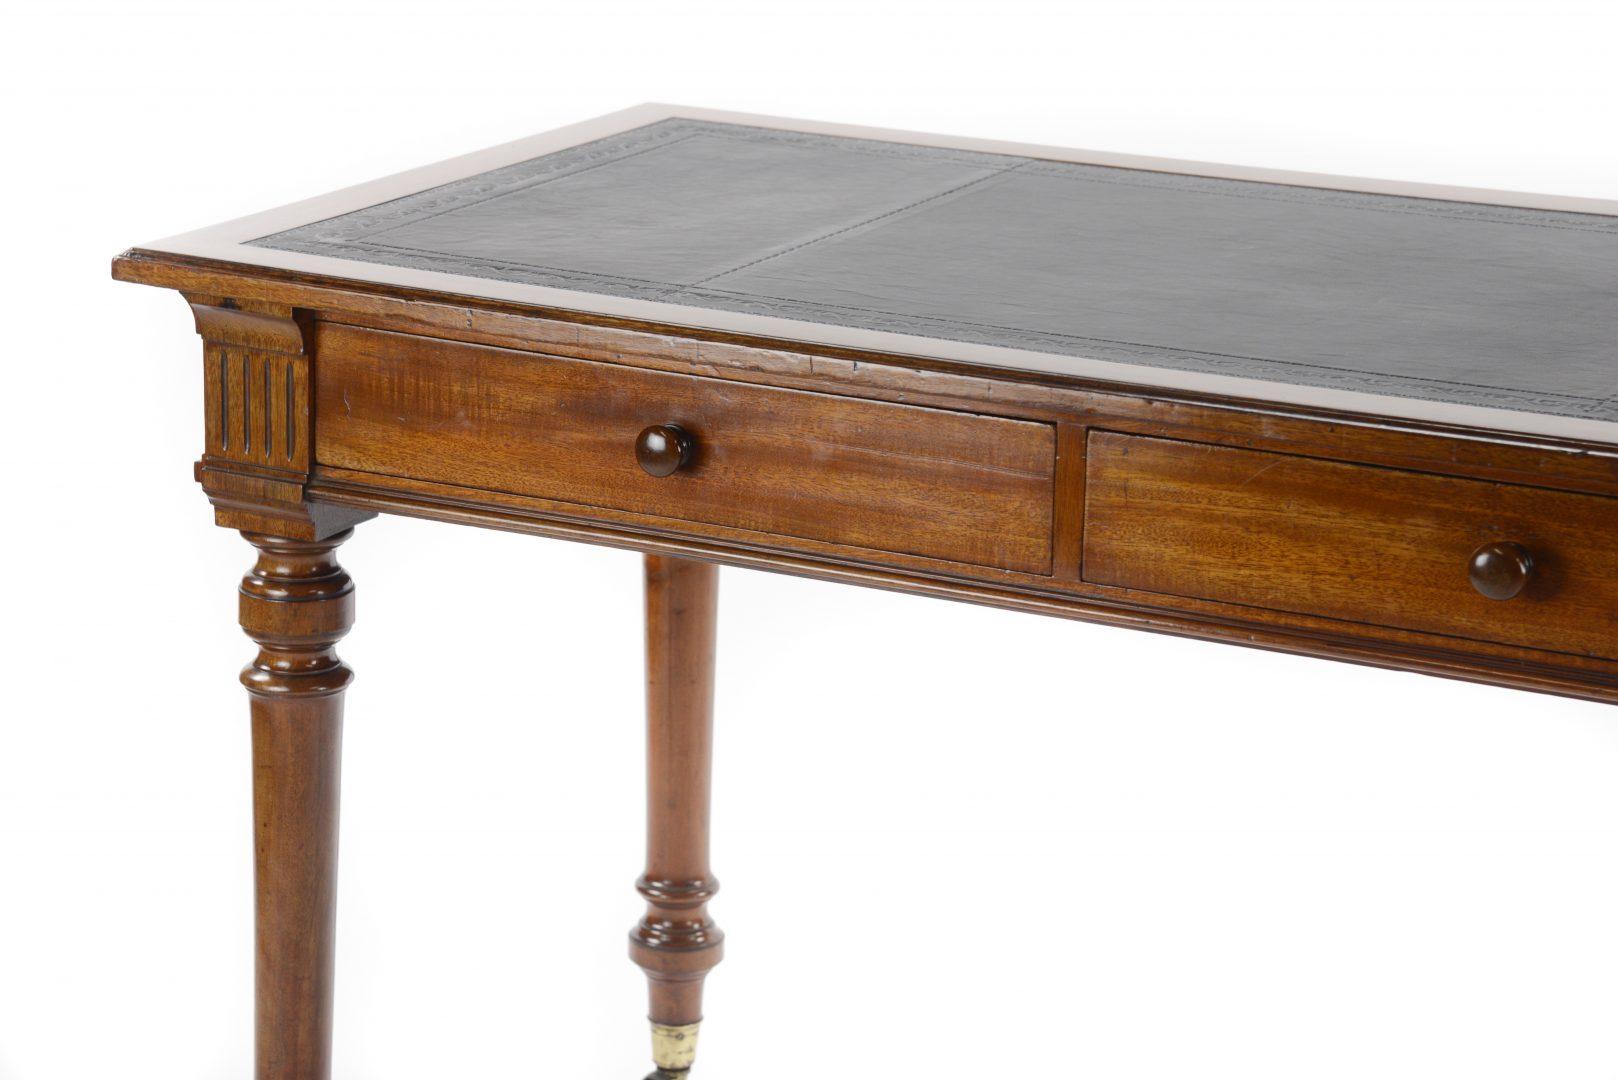 A late 19th century mahogany leather top writing table, signed Gillows and L 2409 indicating a manufacturing date of 1874

Gillows of Lancaster and London, also known as Gillow & Co., was an English furniture making firm based in Lancaster,